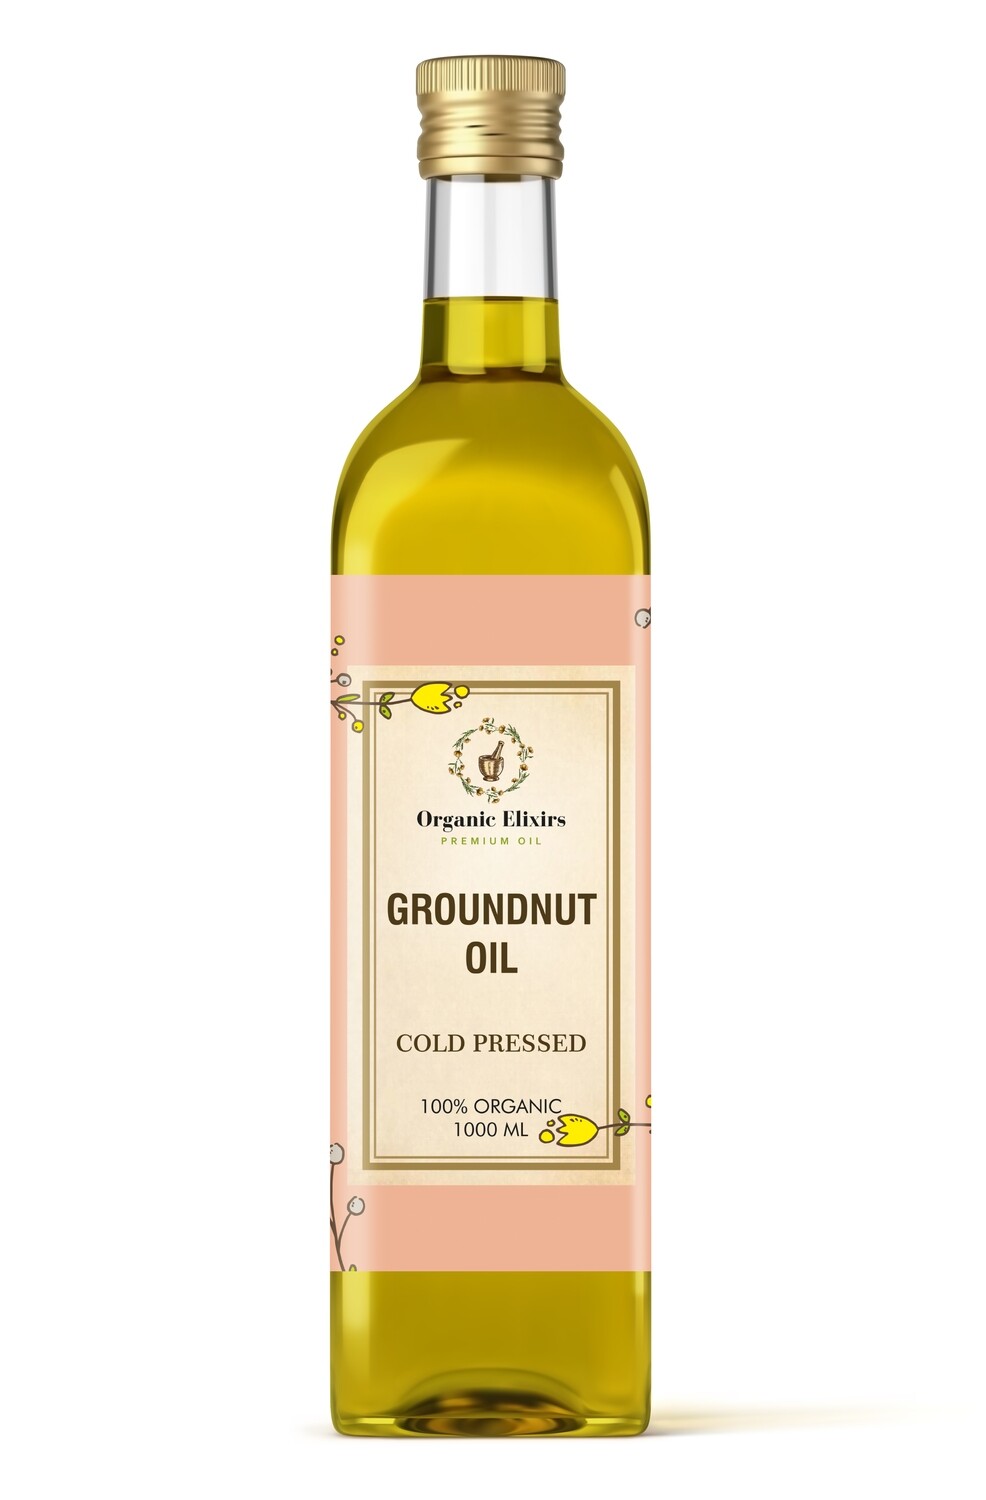 Organic Elixirs Cold Pressed Groundnut Oil 1 Litre